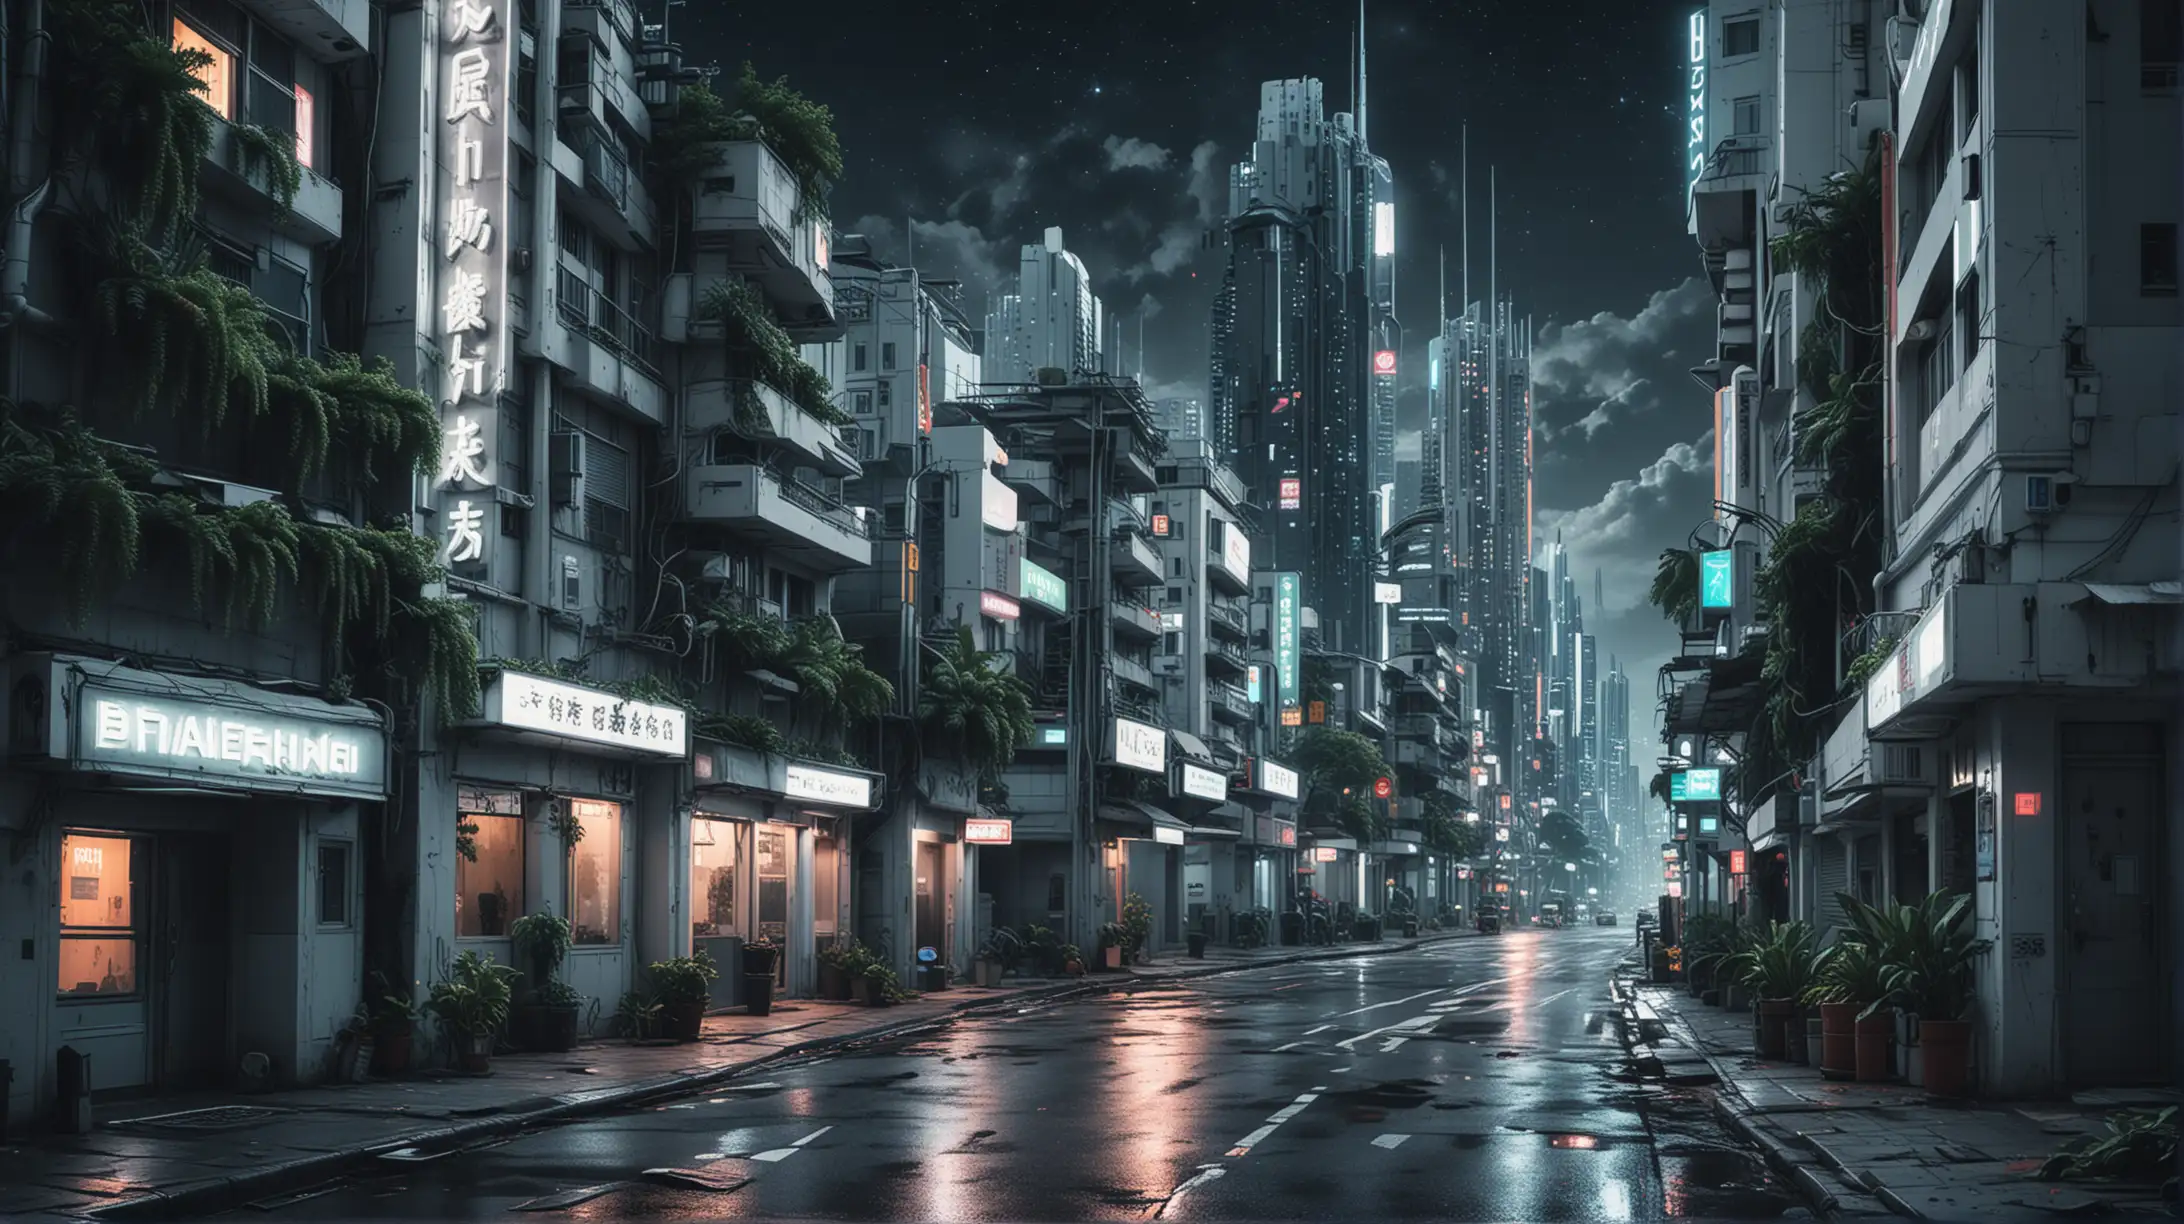 Futuristic Cyberpunk Cityscape with Neonlit Streets and White Skyscrapers